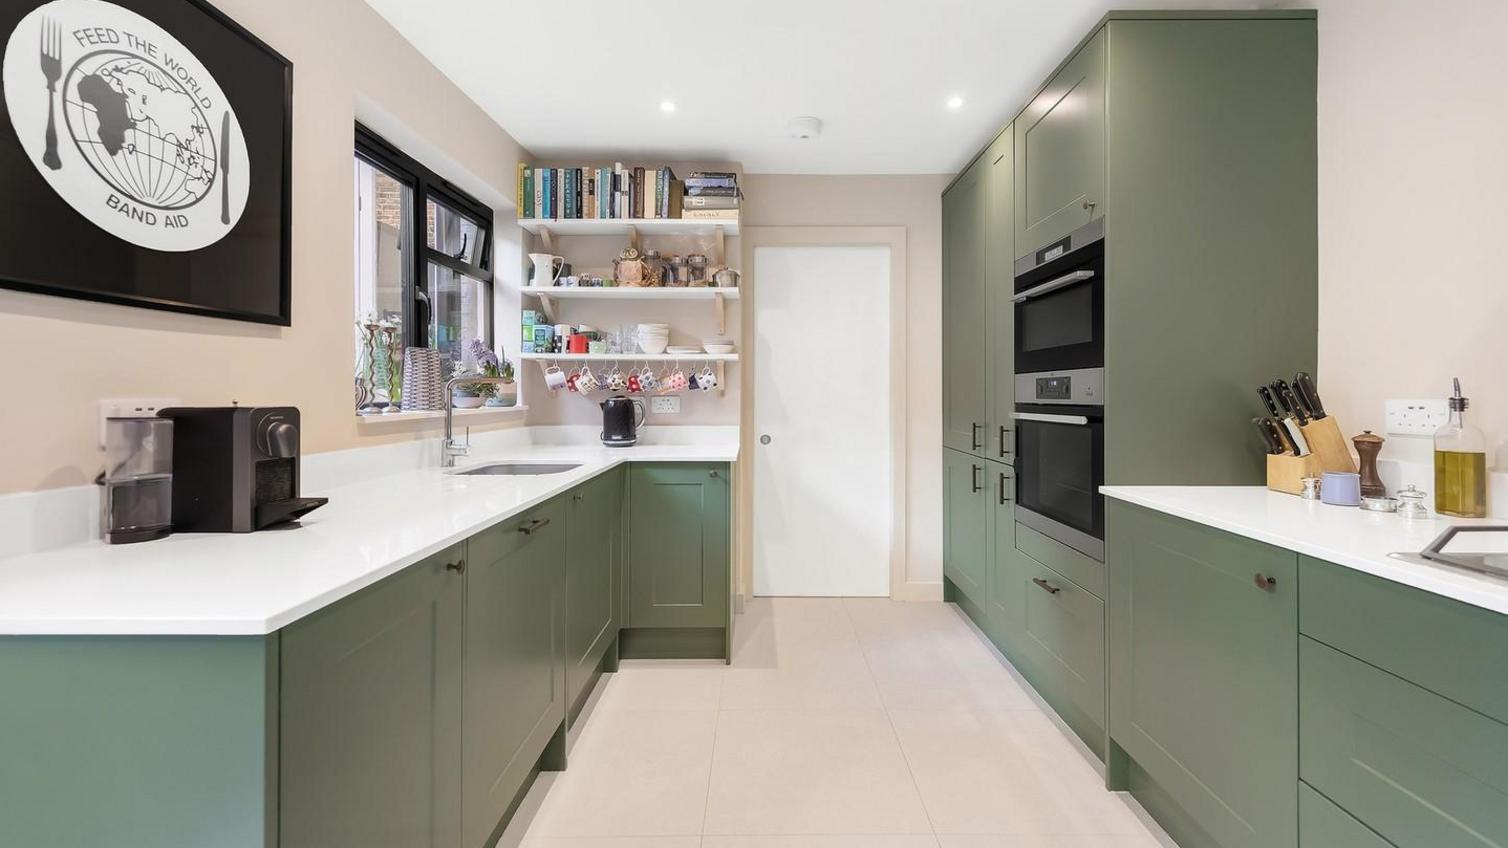 Bespoke worktop idea featuring white worktops paired with green, shaker cupboards in a galley layout.